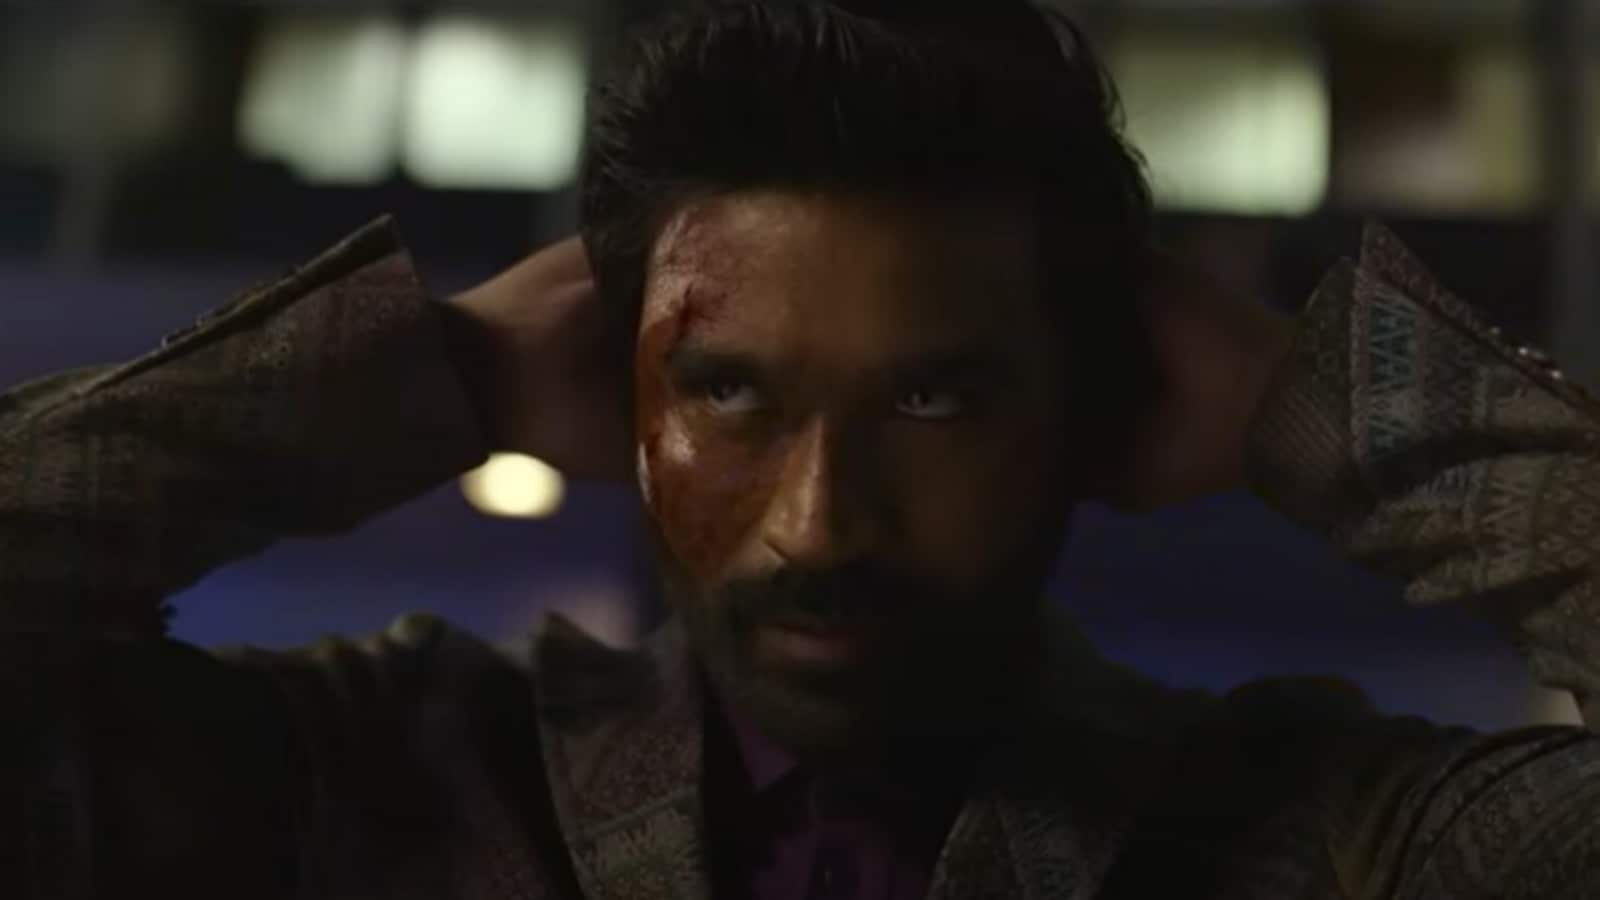 Dhanush promises action fans they are ‘in for a feast’ in The Gray Man behind the scenes video. Watch